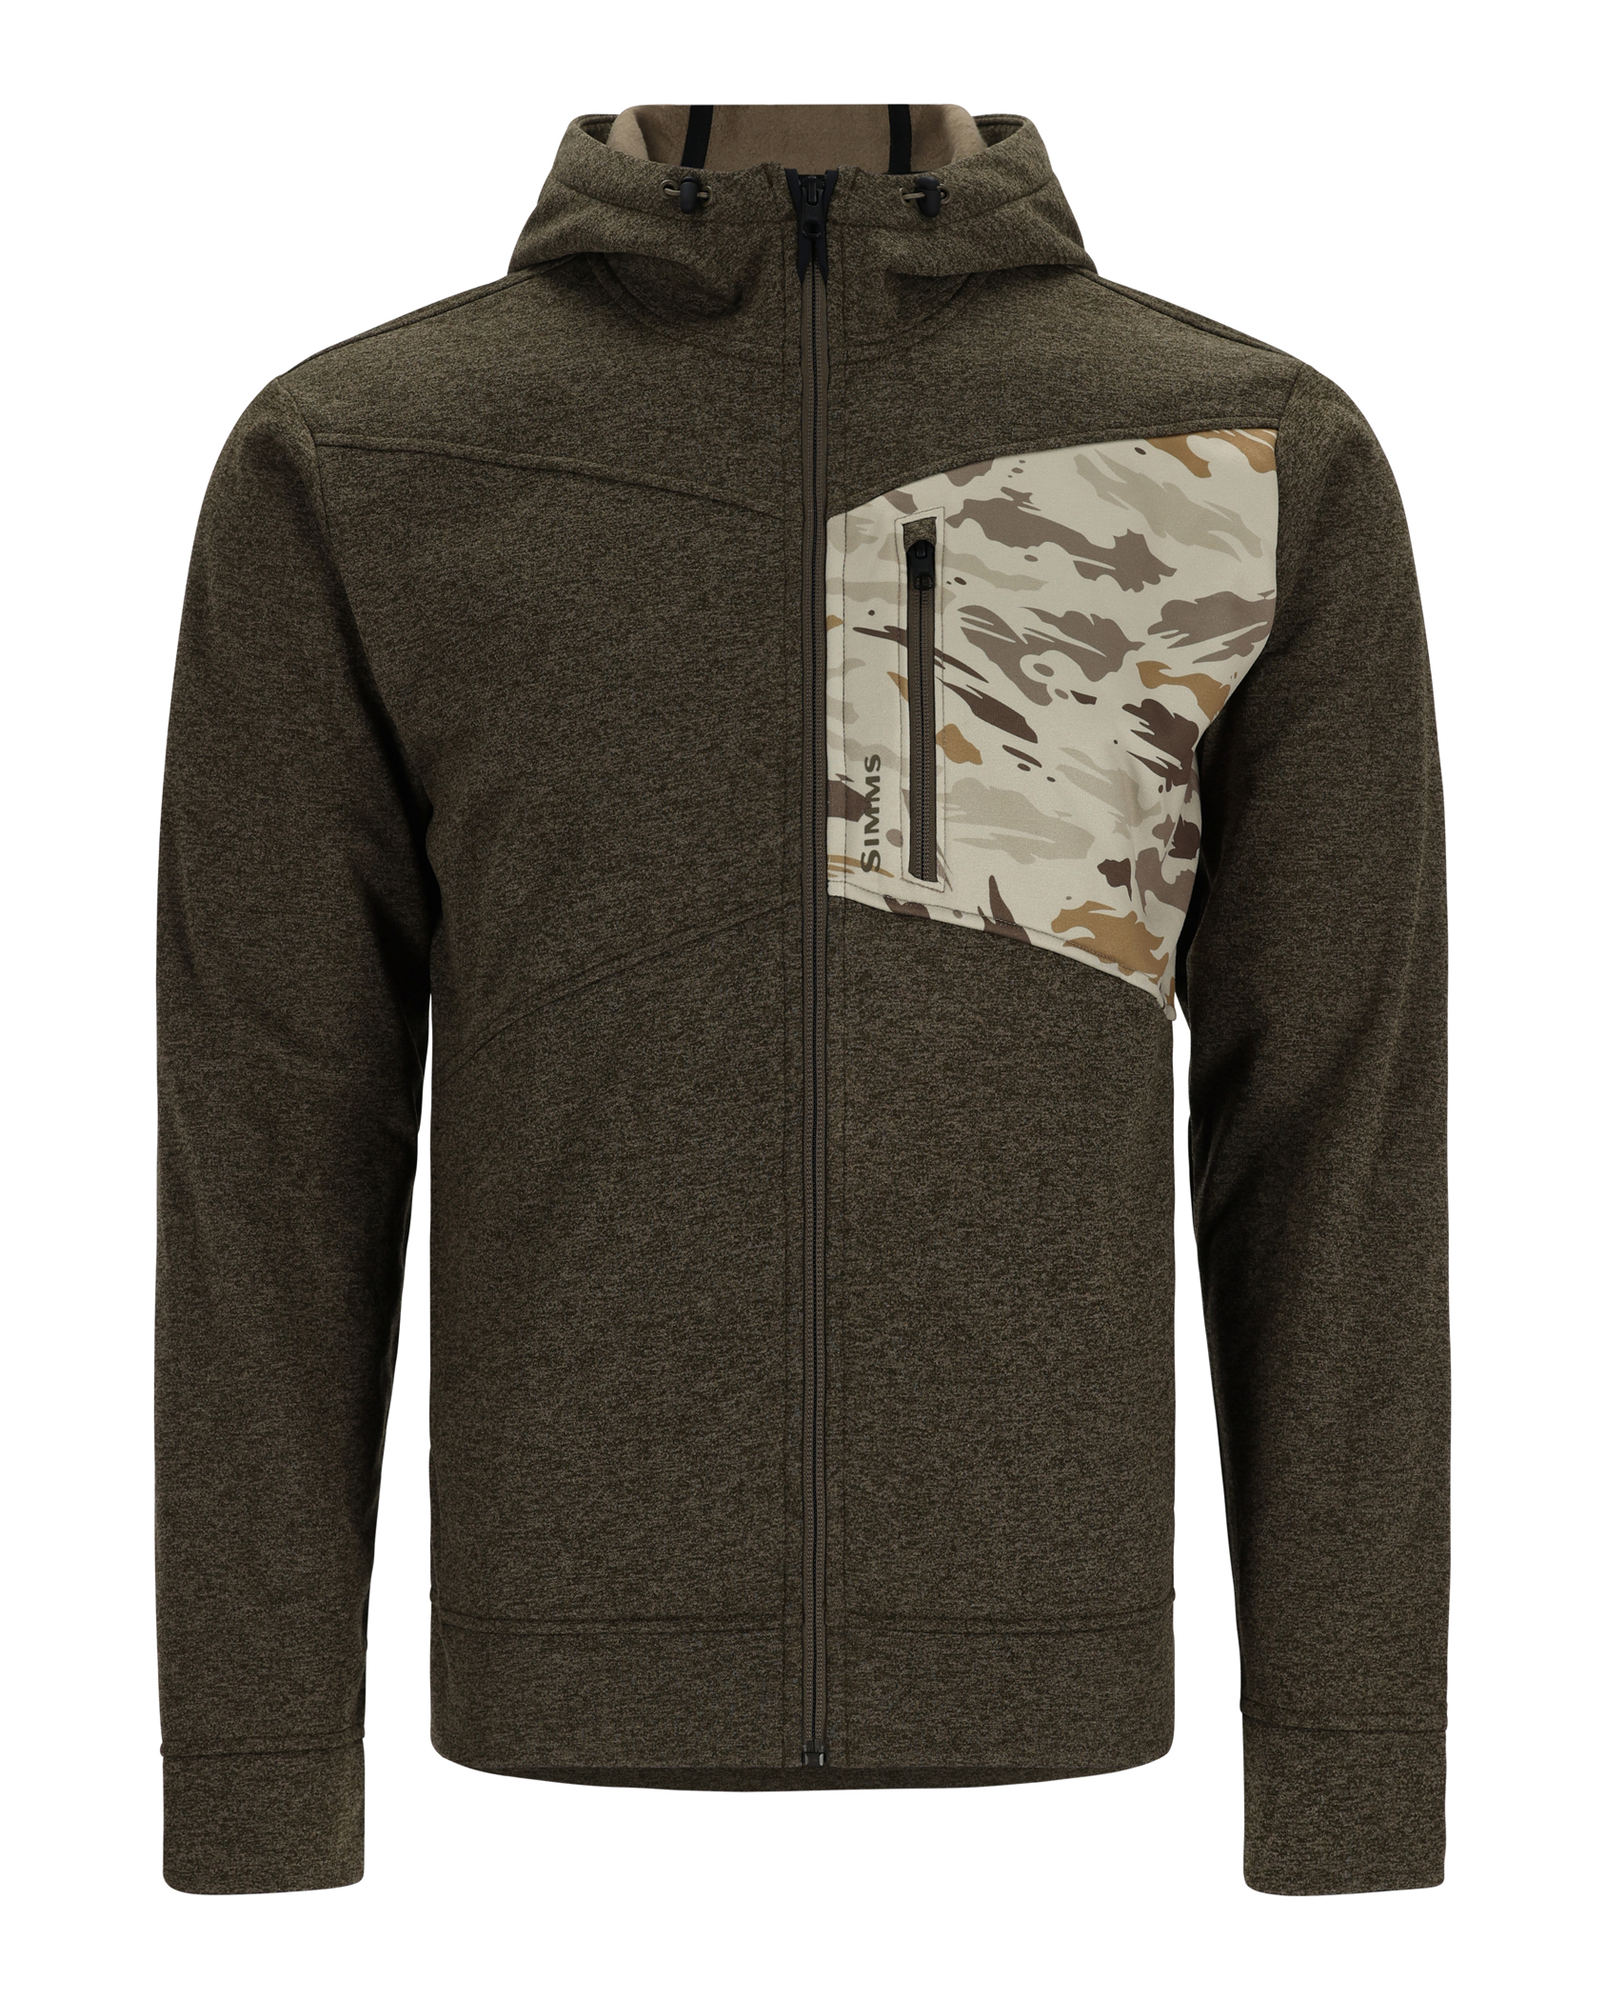 Order Simms CX Full Zip Hoody online at the best price with free shipping.